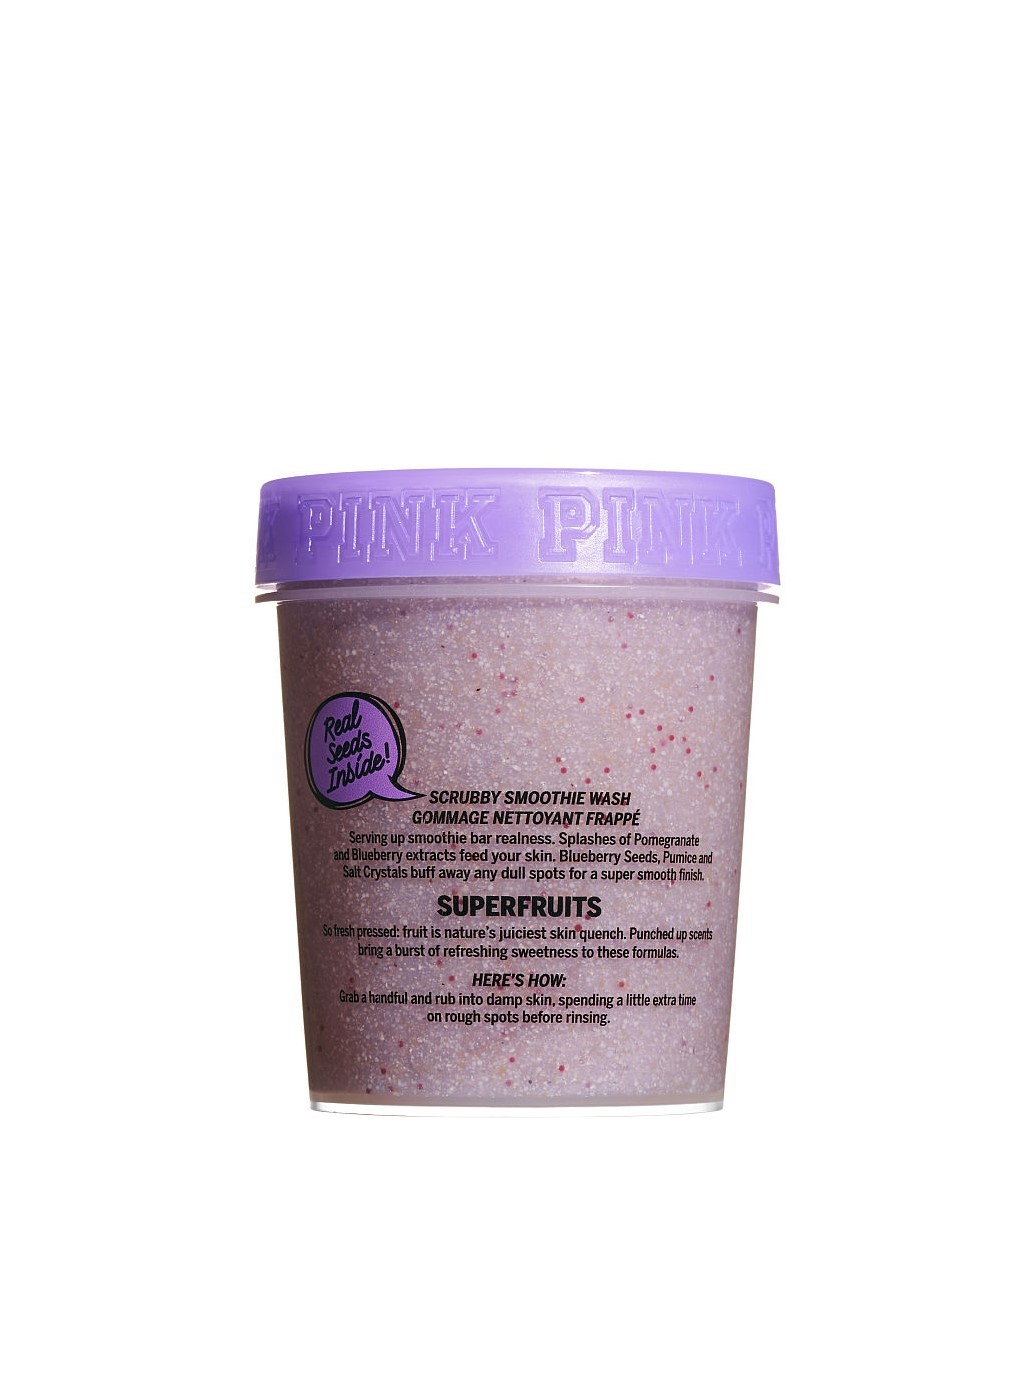 Скраб для тела Victoria's Secret PINK Berry Scrub Scrubby Smoothie Wash with Pomegranate Extract